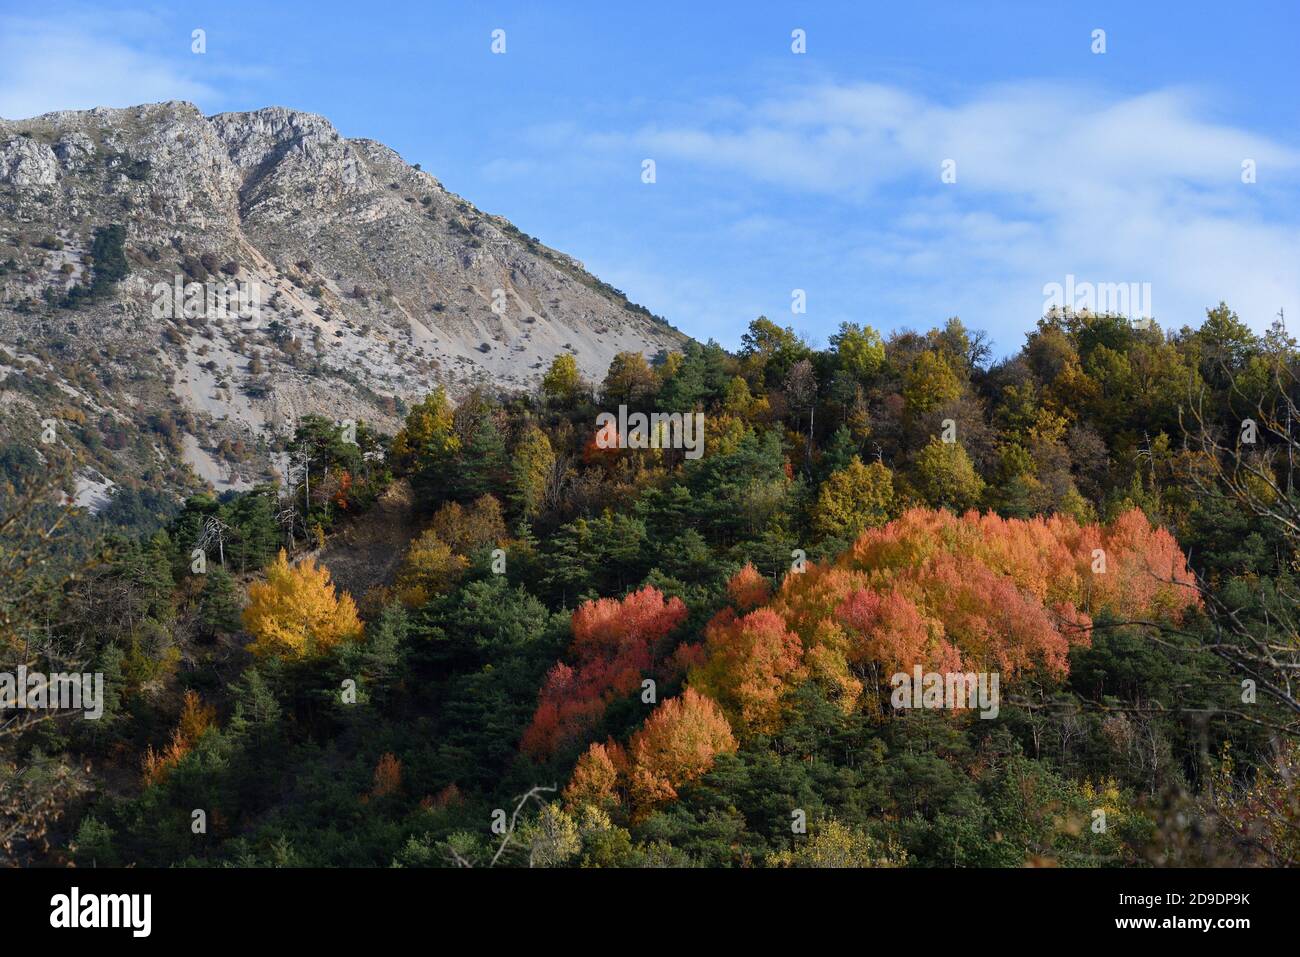 Autumn Colours including Colorful Maple Trees or Leaves & Pine Trees in the Fall in the Verdon Gorge Regional Park or Nature Reserve Provence France Stock Photo